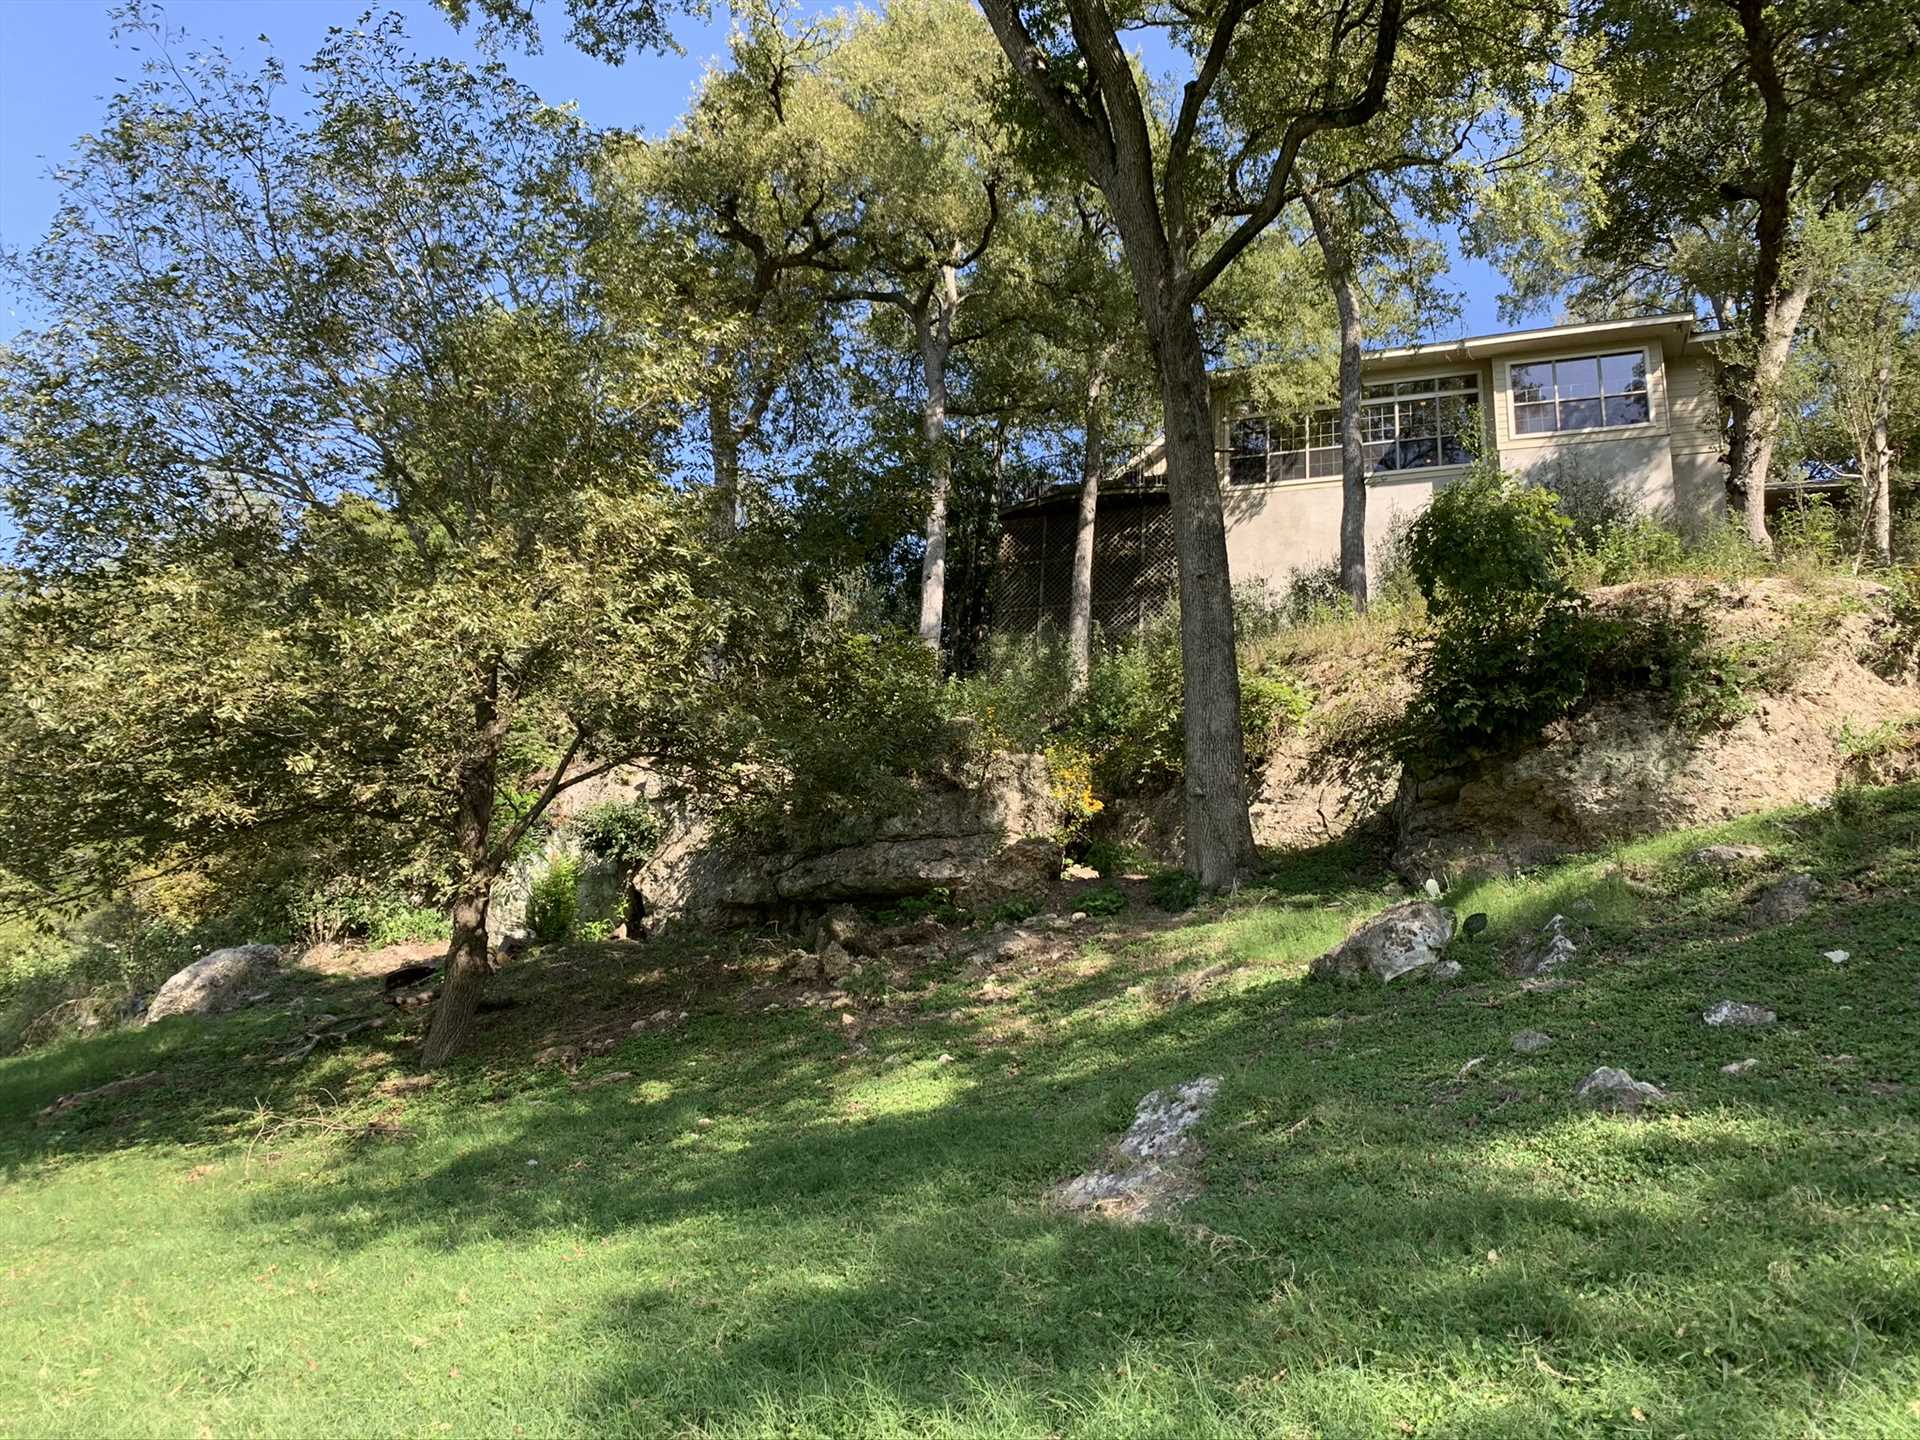                                                 This is the Retreat as seen from the banks of the Guadalupe. Now, reverse that, and imagine the river view you'll have from the top of the cliff!